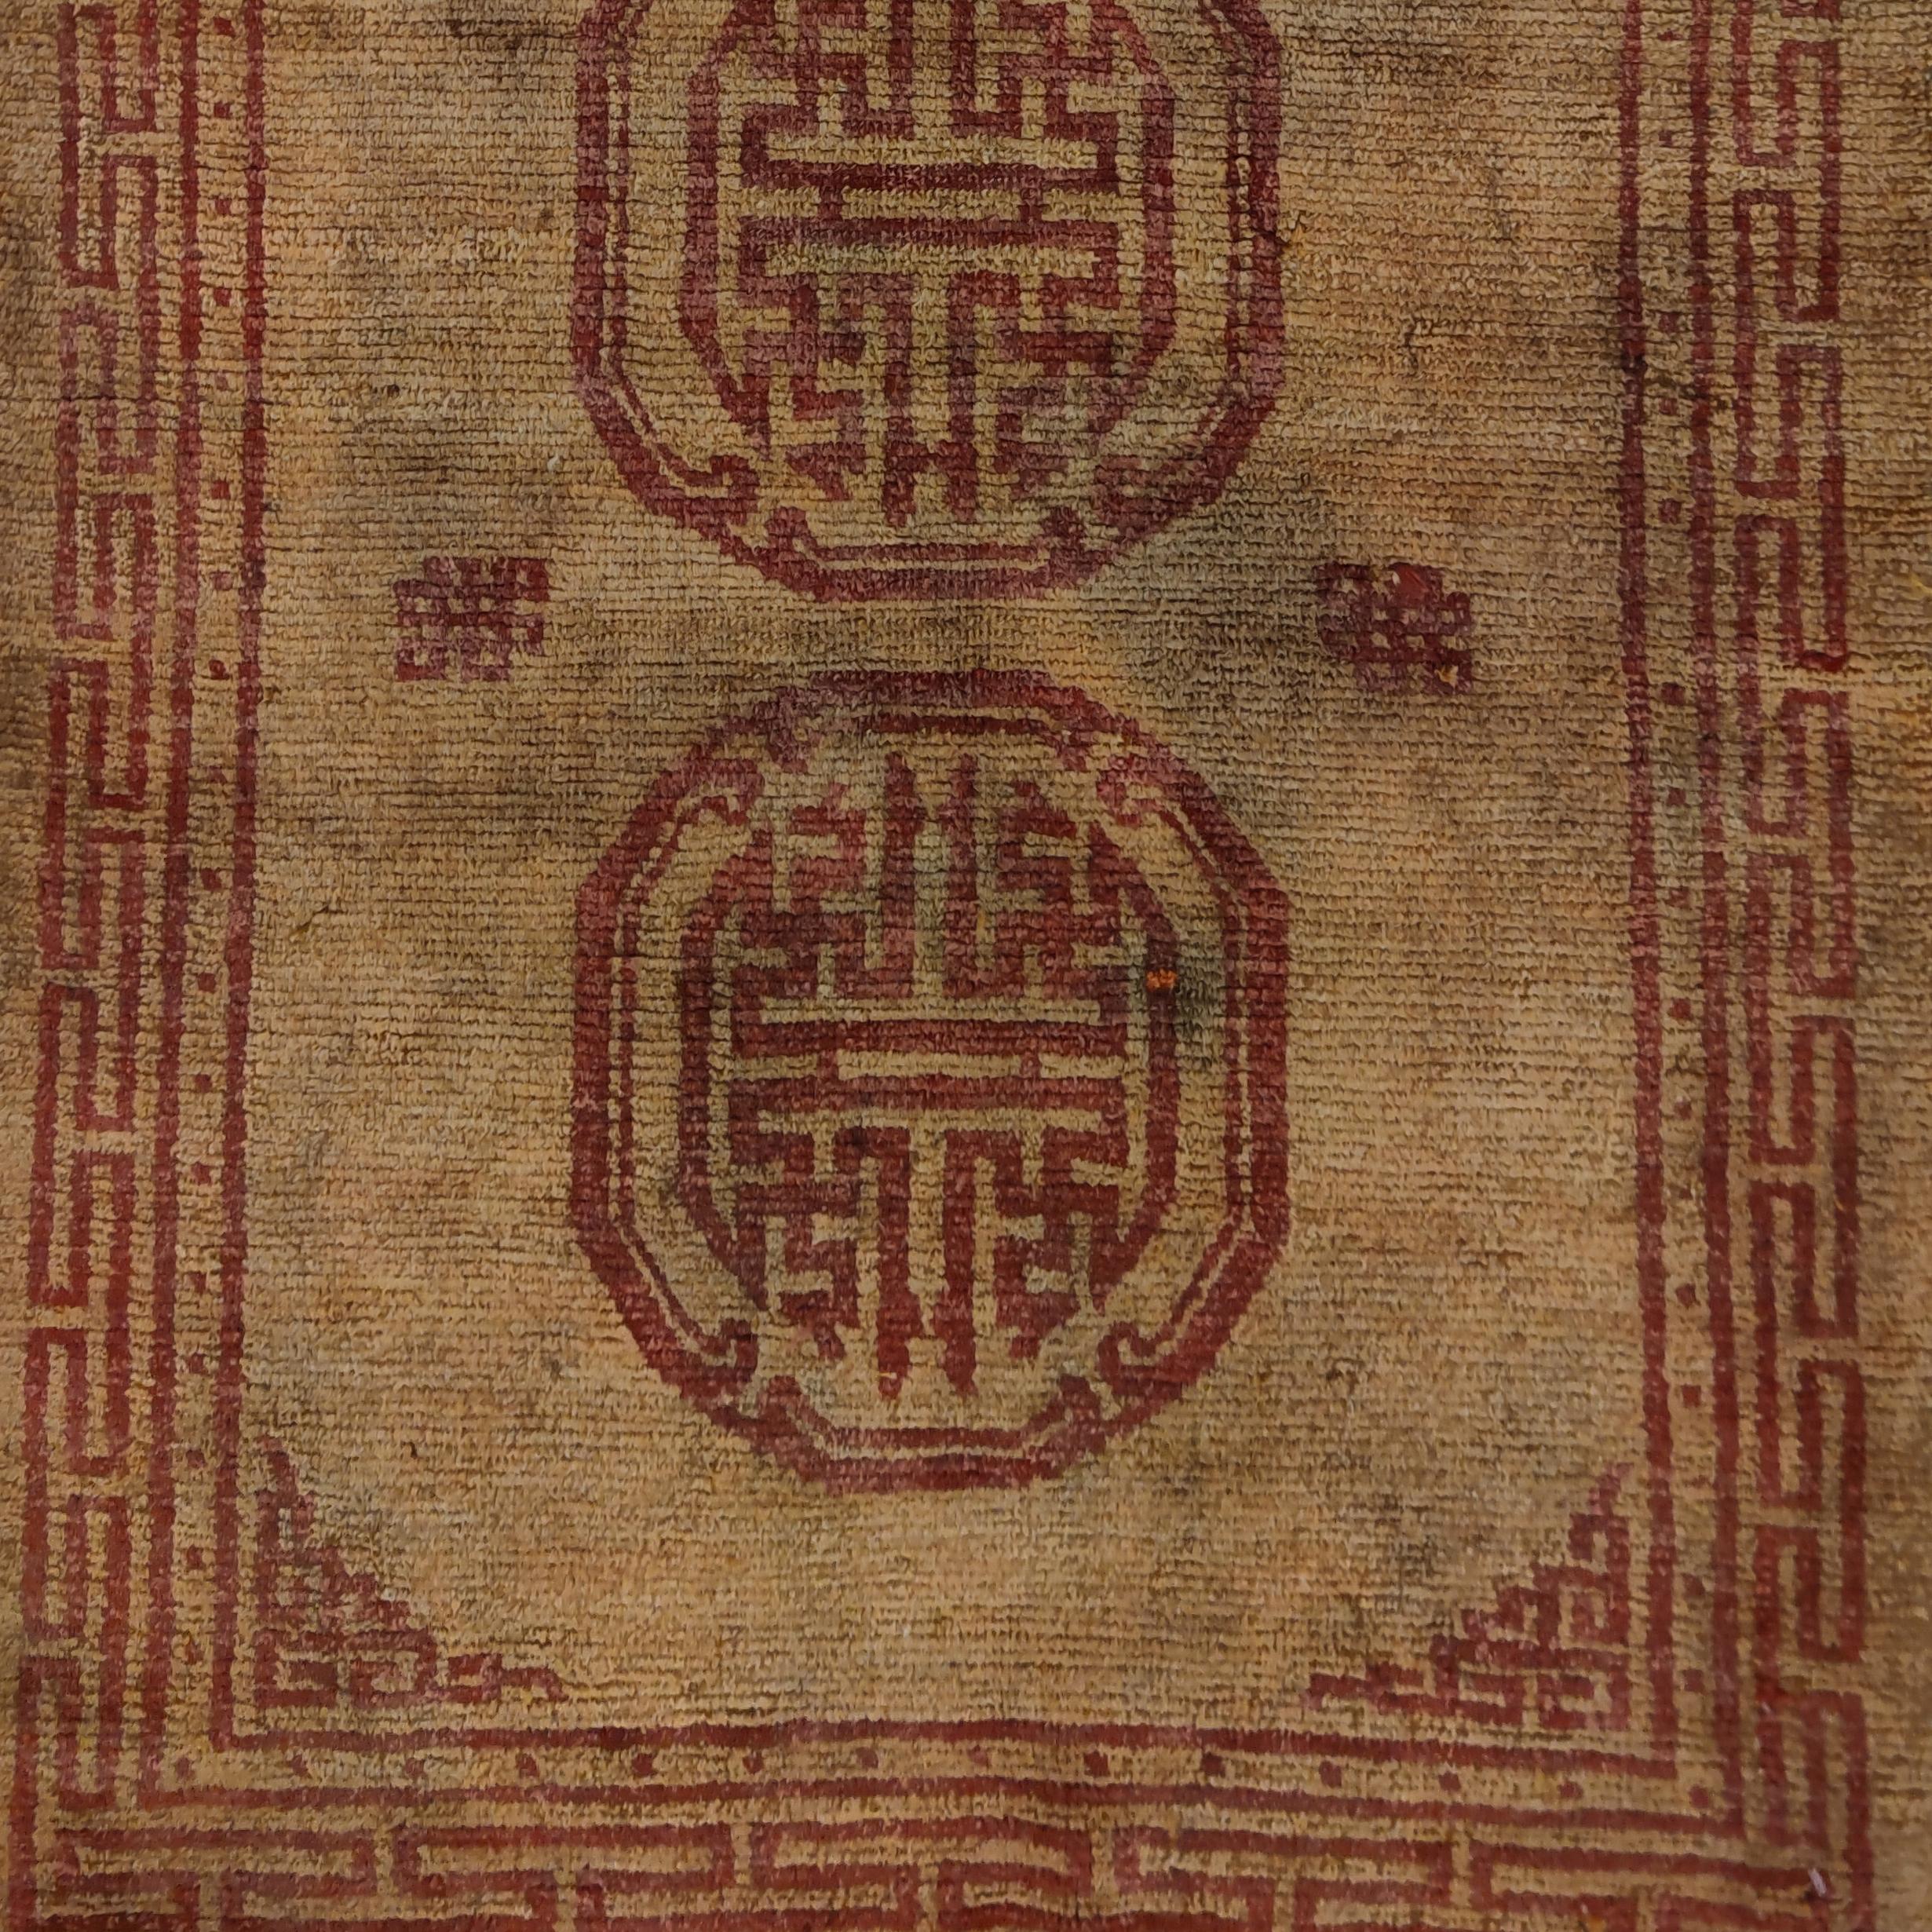 A rare and unique Tibetan rug, distinguished by a soft yellow background onto which is superimposed a pattern in light red consisting of three Mandala, symbols of the universe. Rugs in these monastic colours were employed as meditation weavings by